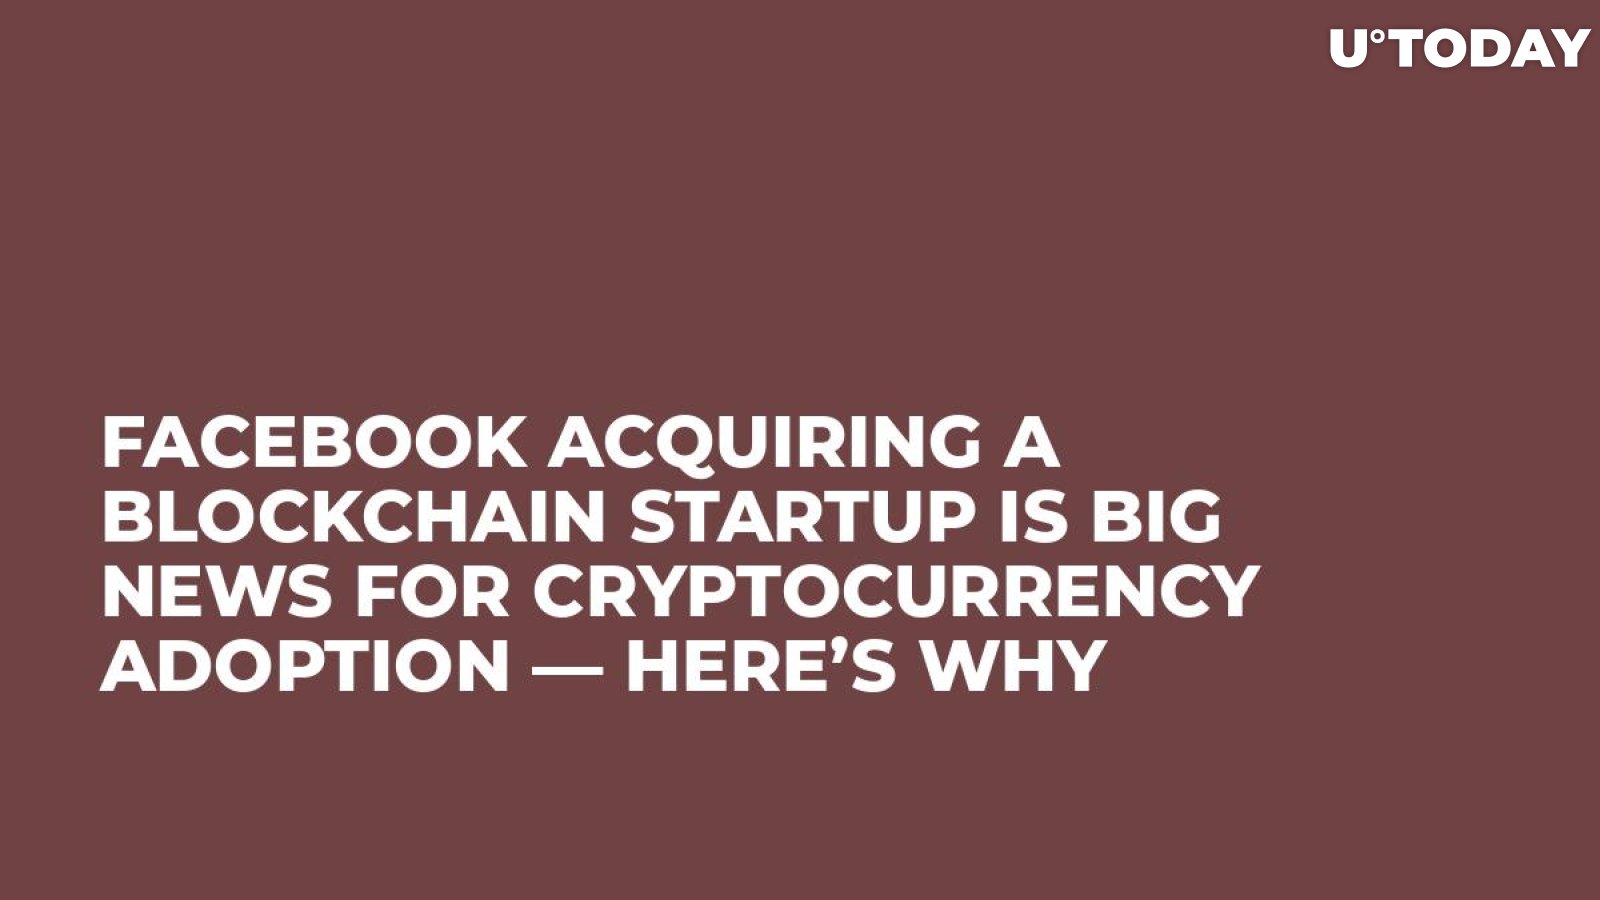 Facebook Acquiring a Blockchain Startup Is Big News for Cryptocurrency Adoption — Here’s Why